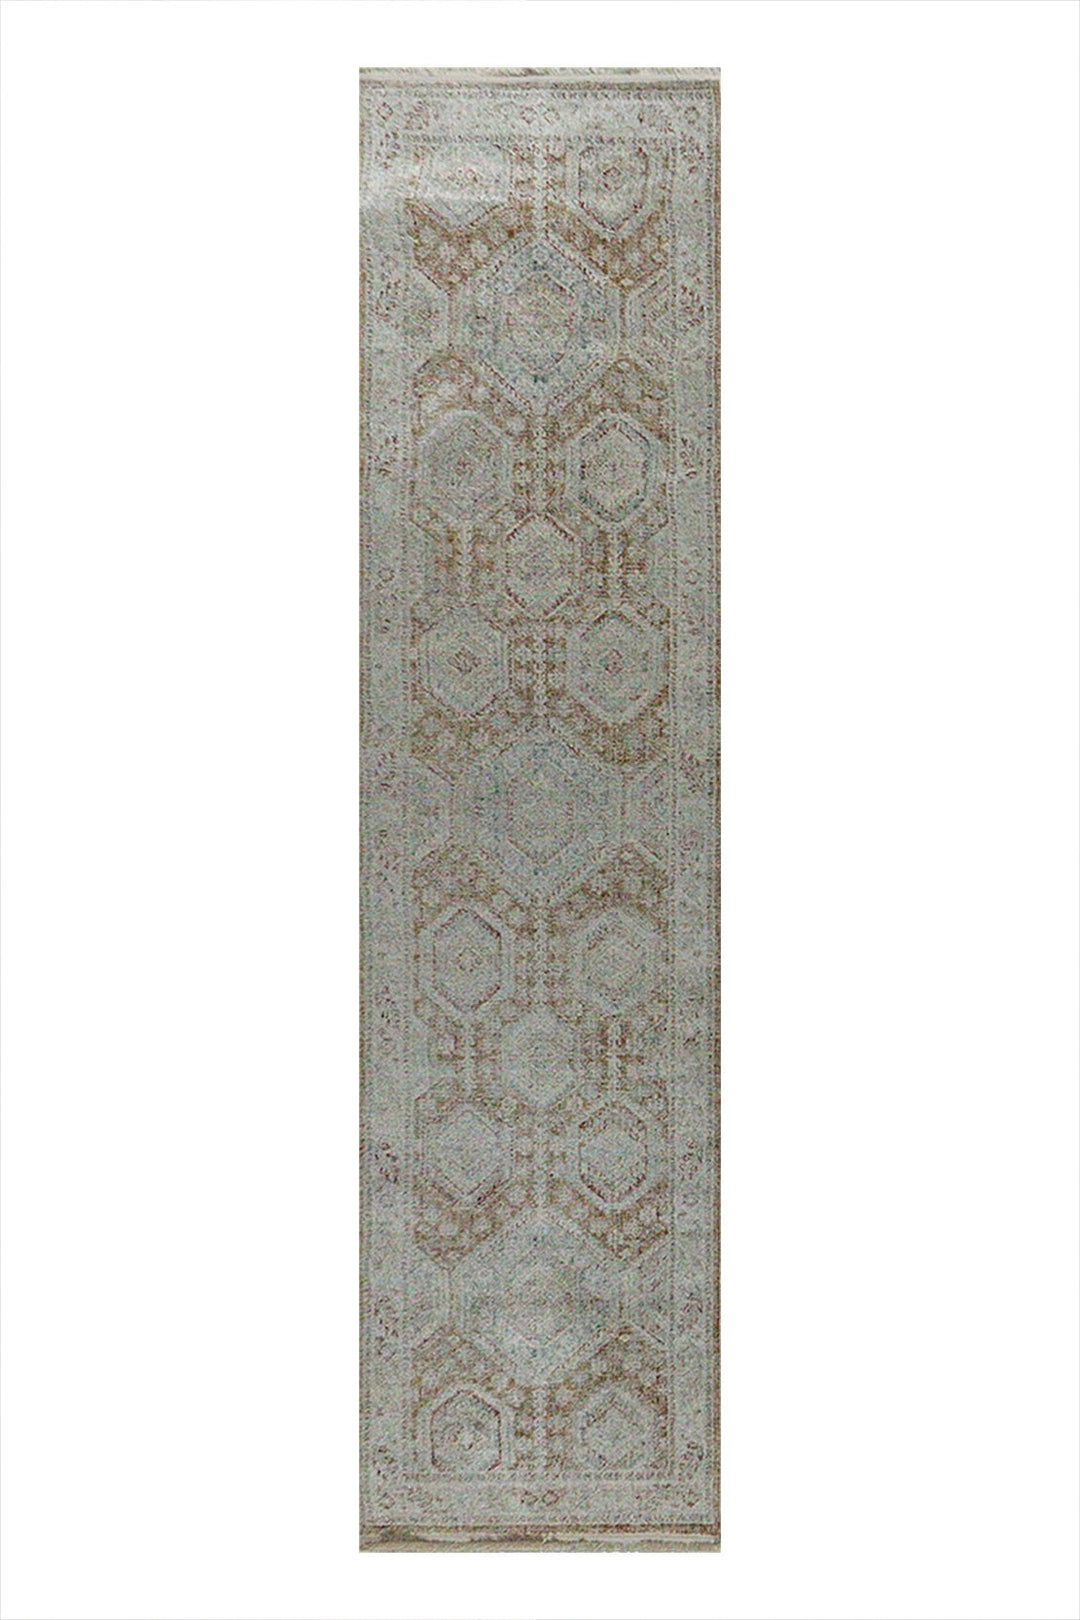 Turkish Modern Festival Viscos Rug - 2.6 x 10. FT - Red - Sleek and Minimalist for Chic Interiors - V Surfaces